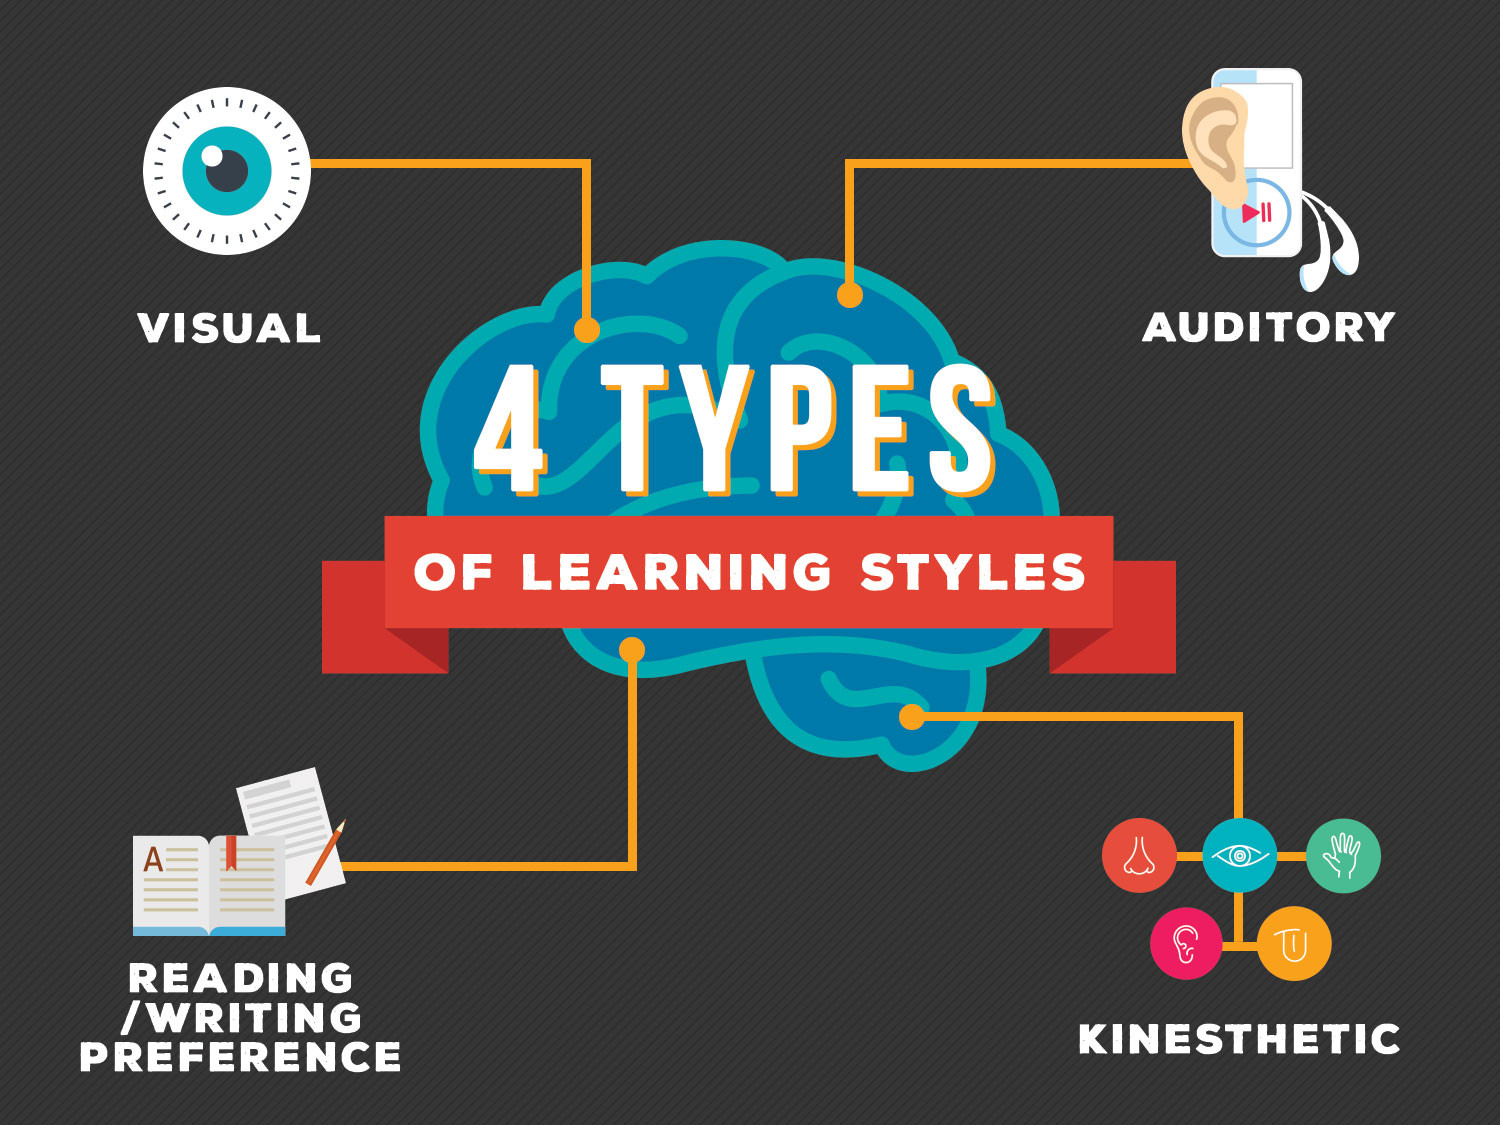 Visual pleasing. Types of Learning Styles. Learning Styles 4 Types. Different Learning Styles. Learning Styles and preferences.